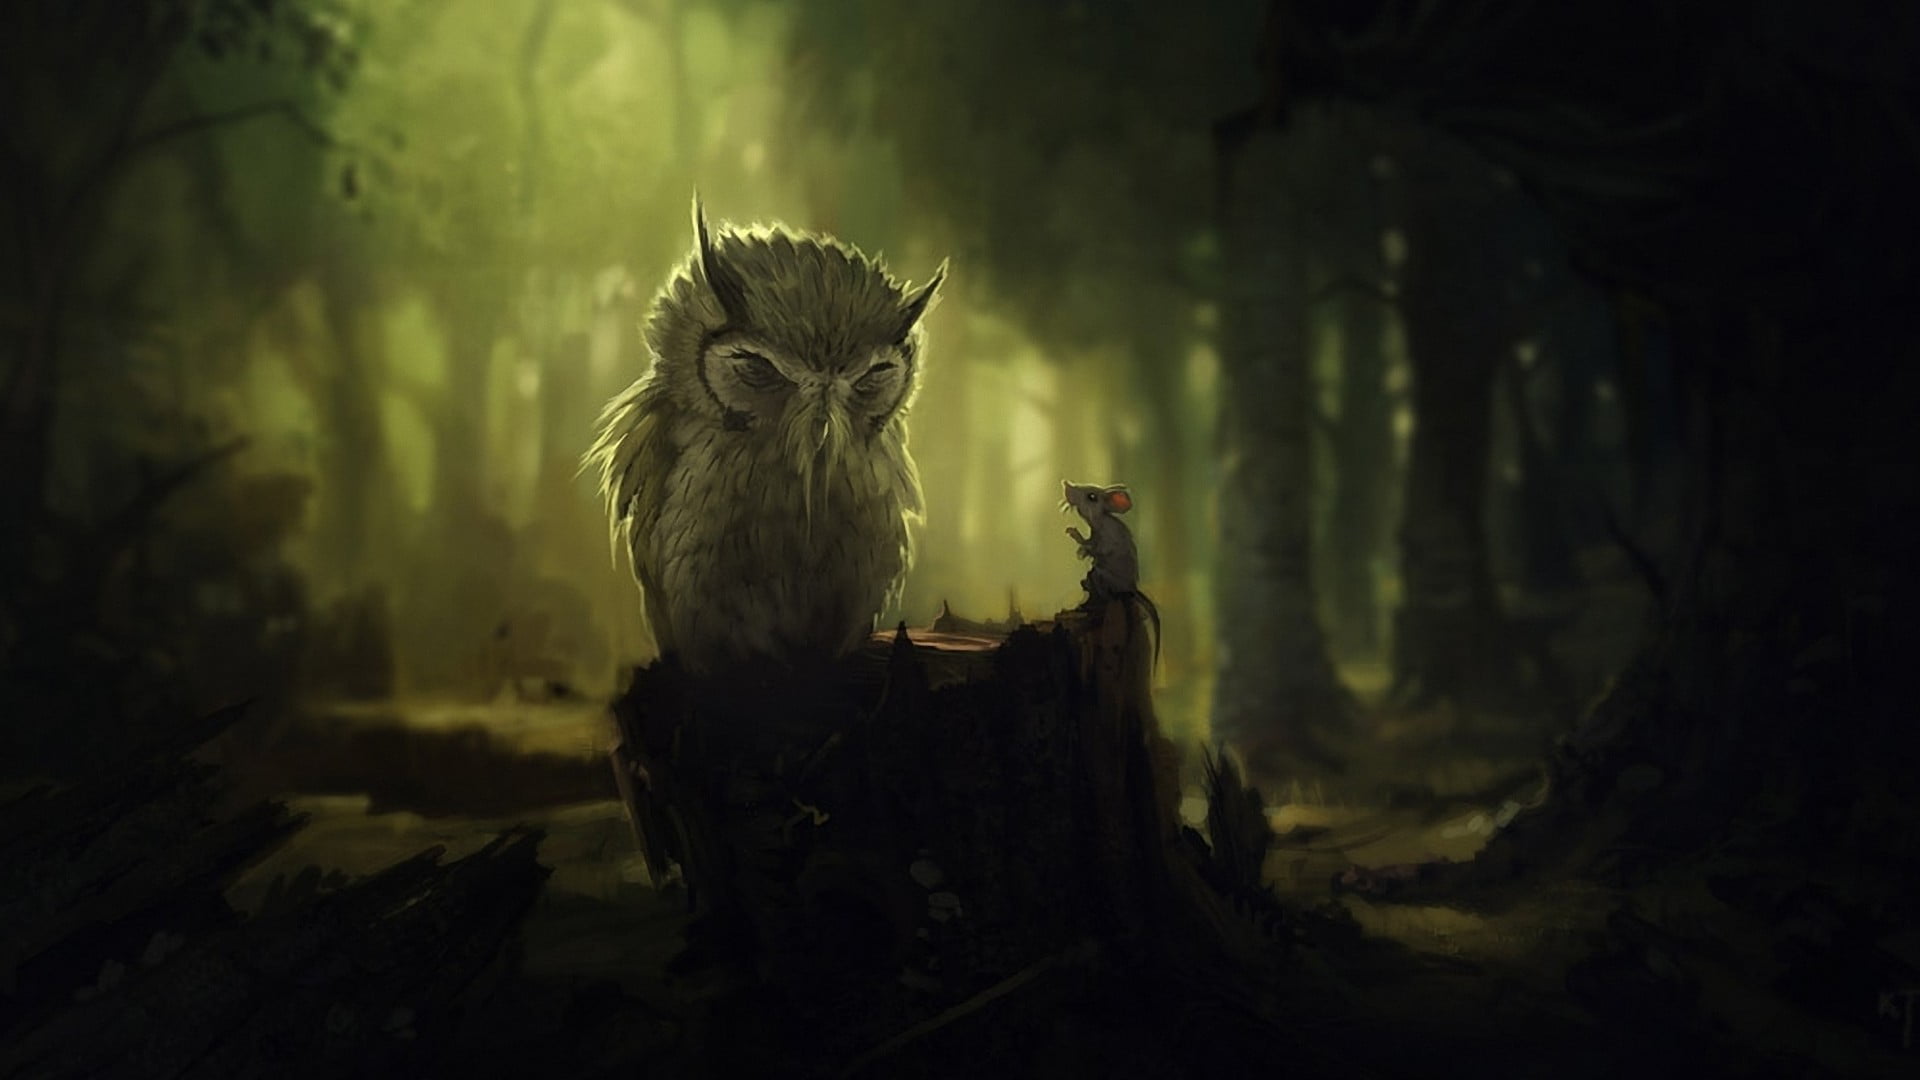 gray owl, gray owl beside gray mouse at nighttime, nature, artwork